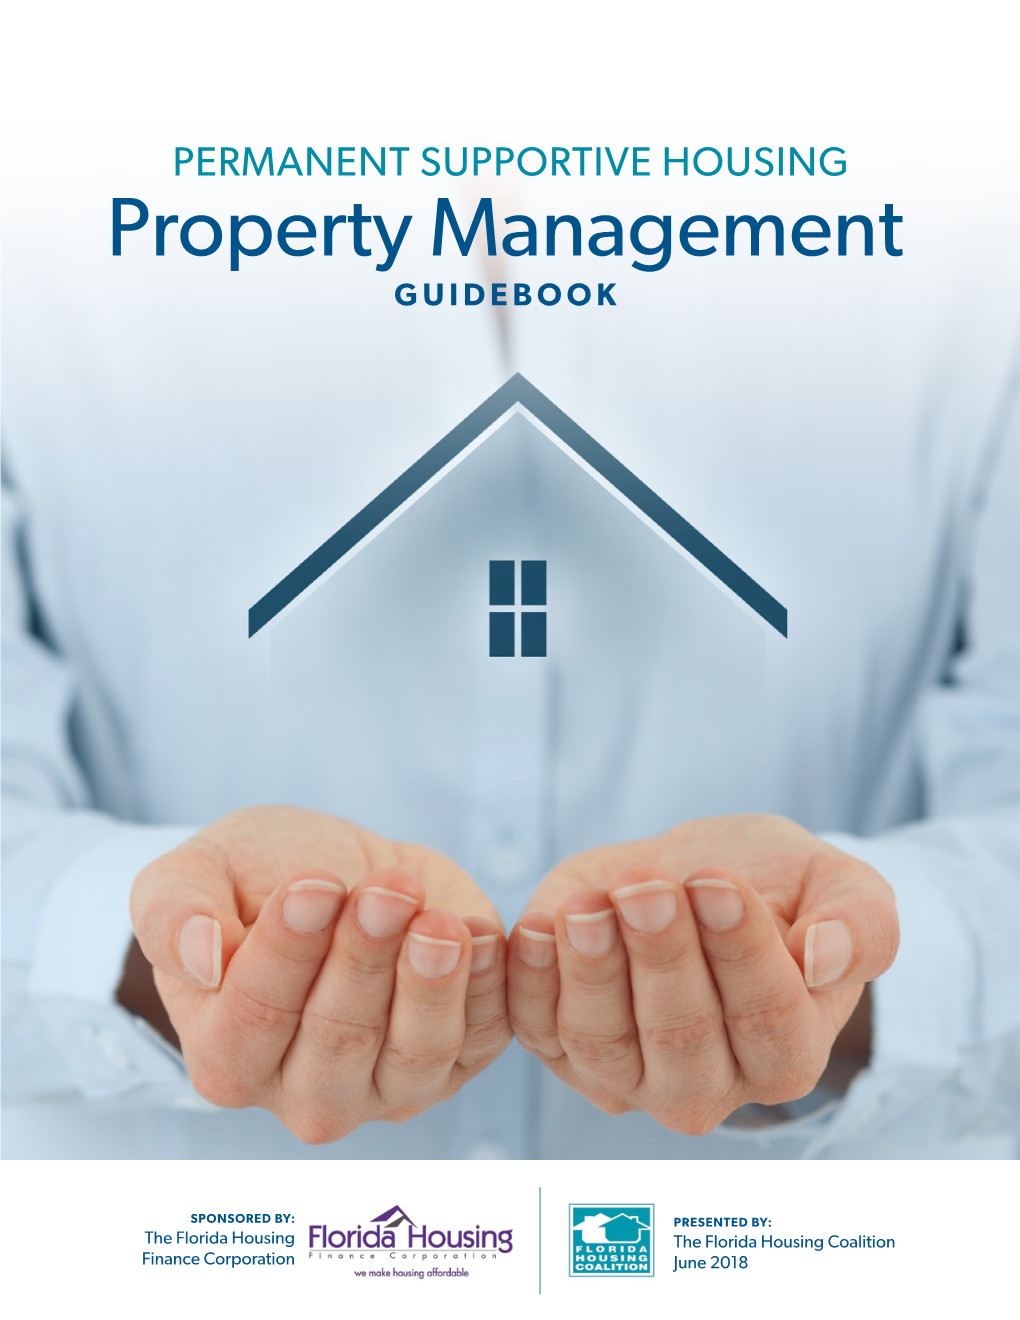 PERMANENT SUPPORTIVE HOUSING Property Management GUIDEBOOK